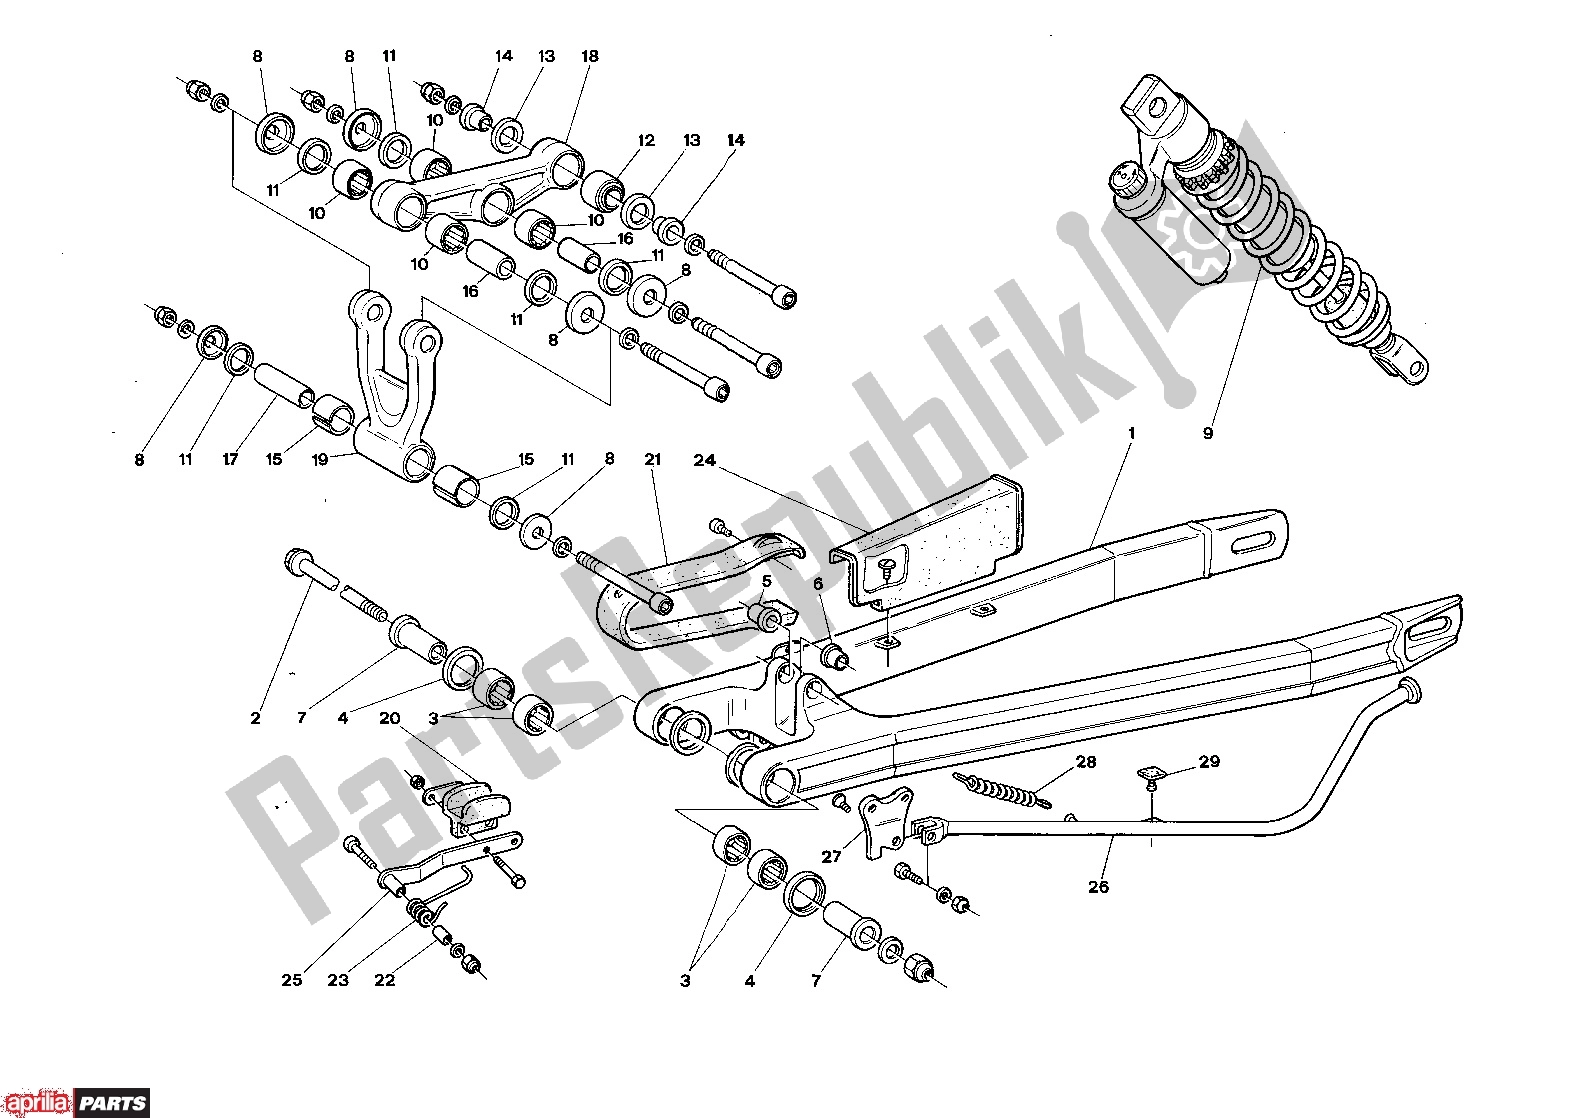 All parts for the Rear Frame of the Aprilia Climber 405 300 1989 - 1990